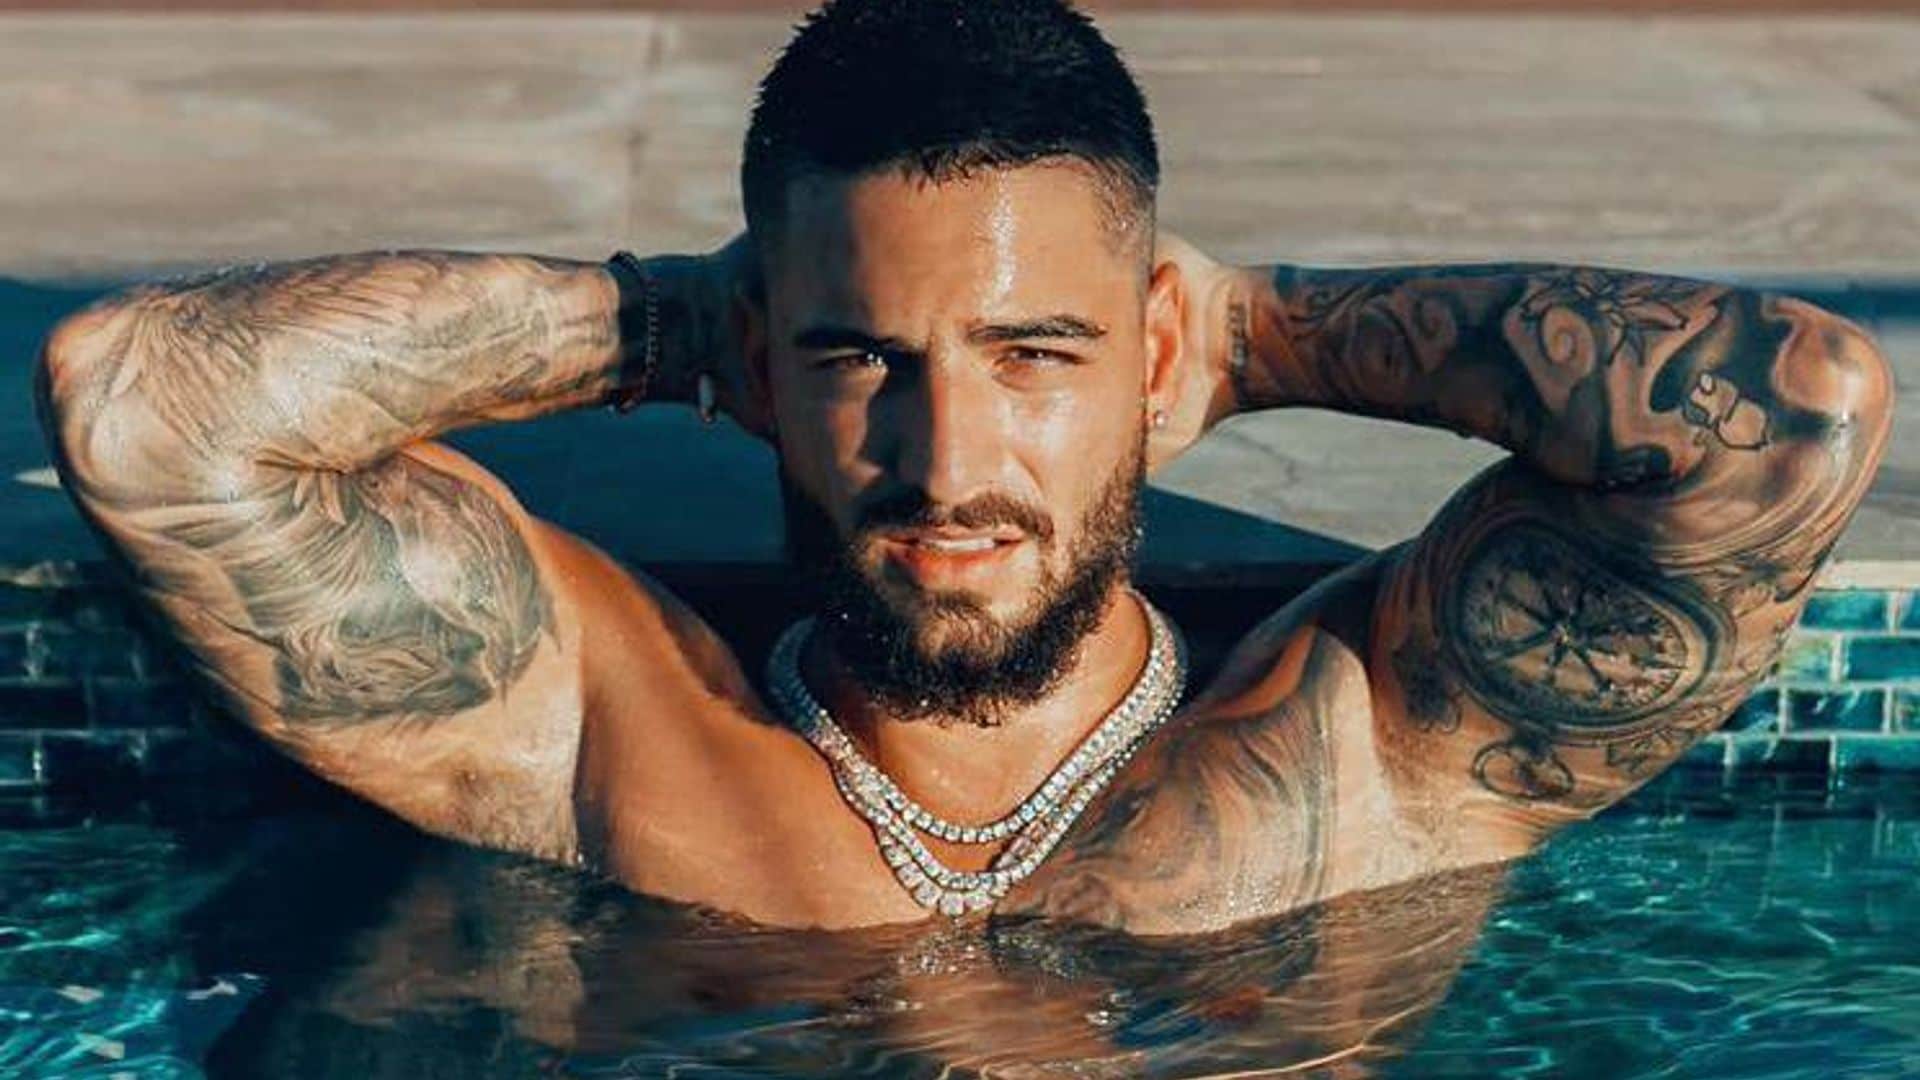 Maluma shows off body (and tattoos) while vacationing with girlfriend